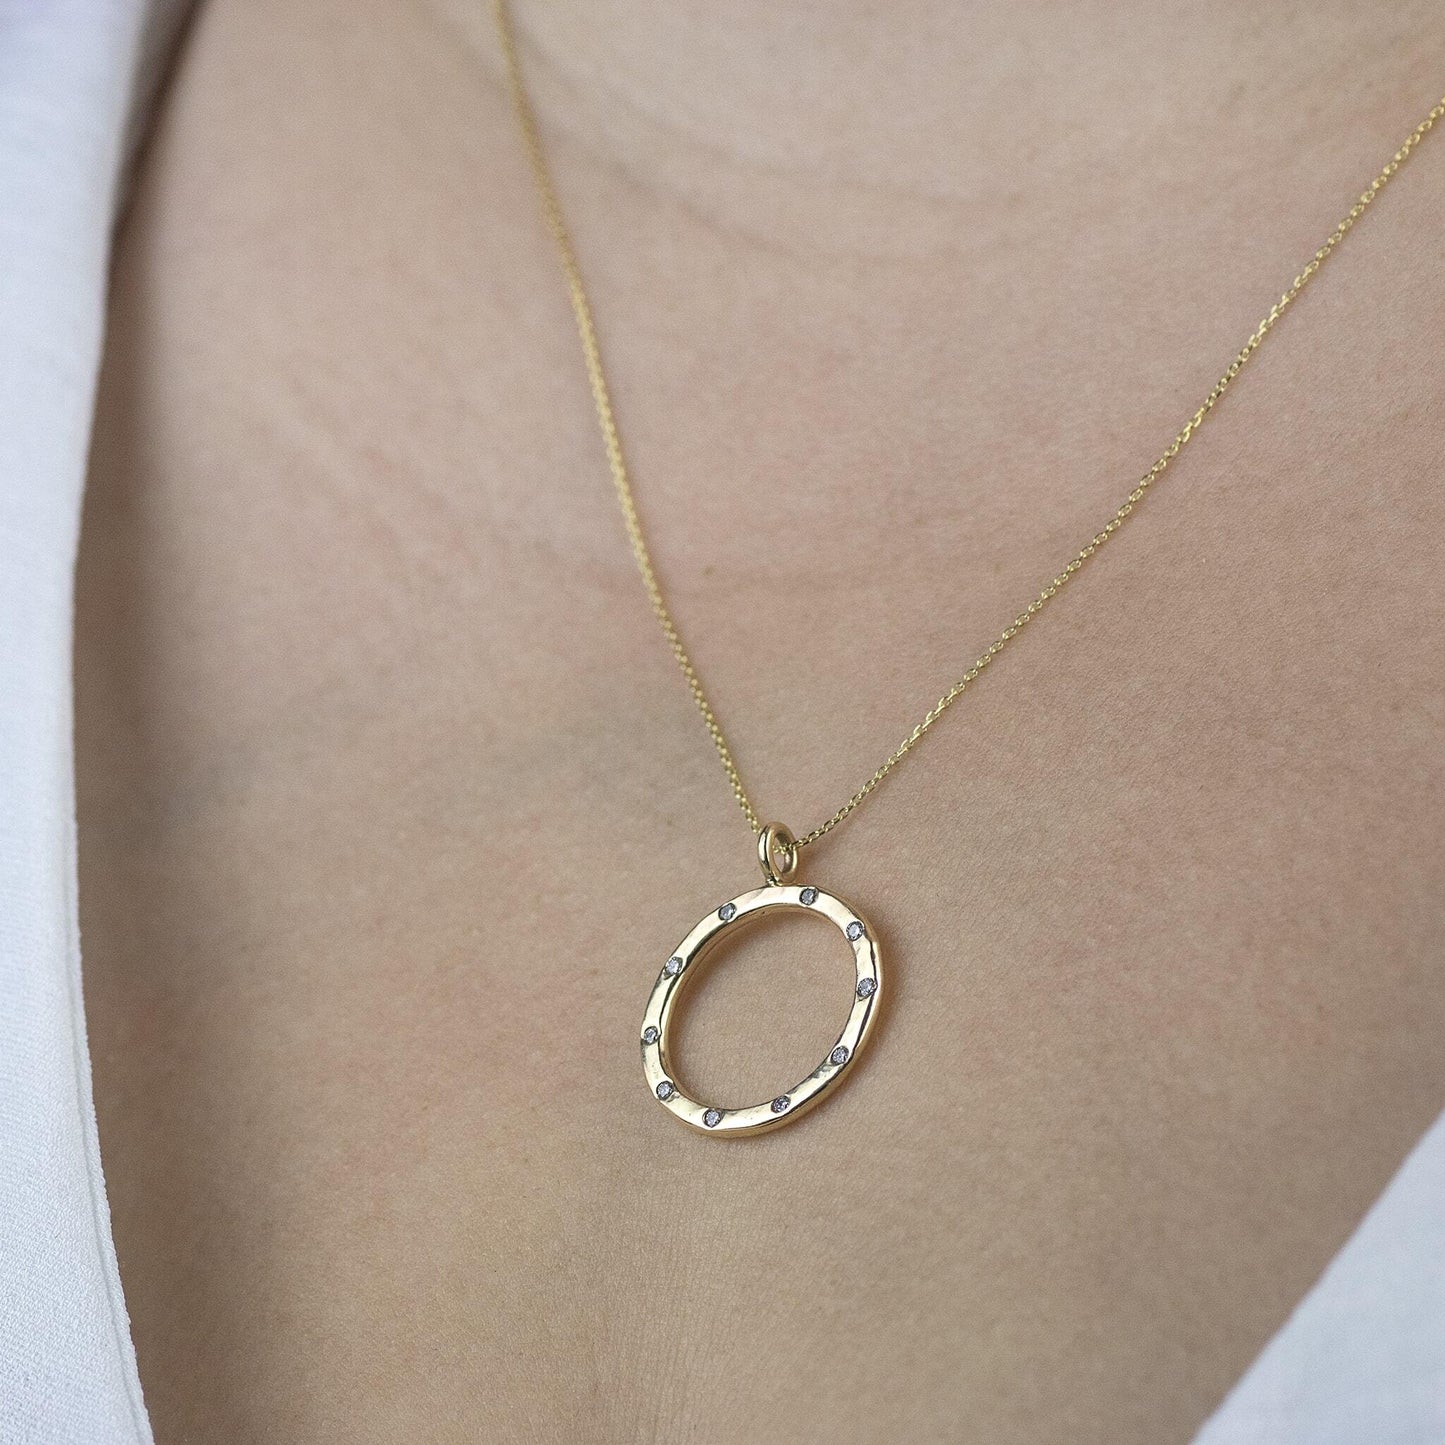 90th Birthday Gift - Recycled 9kt Gold Diamond Halo Necklace - 9 Diamonds for 9 Decades